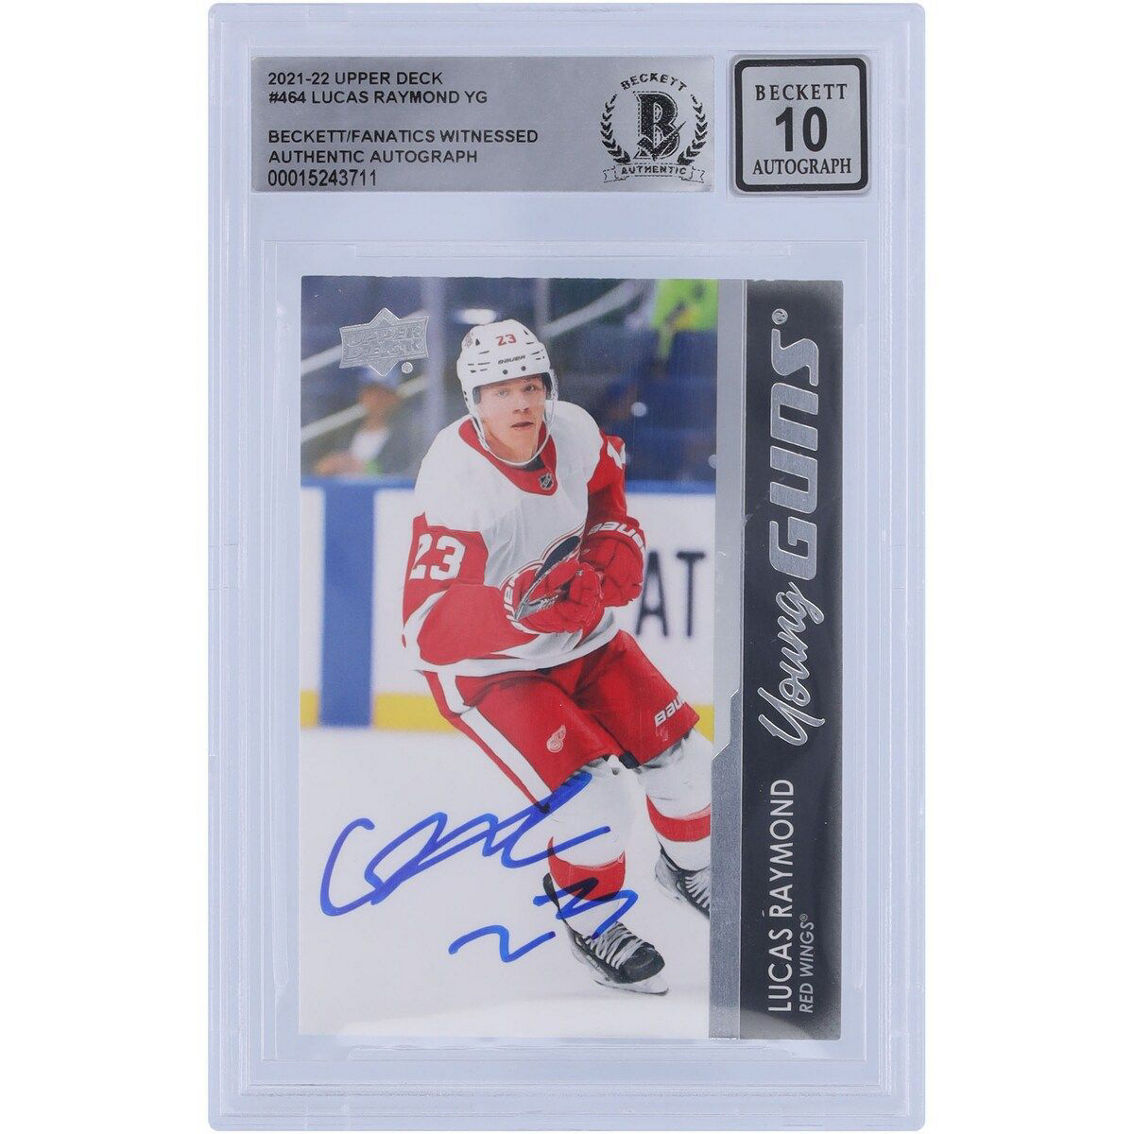 Upper Deck Lucas Raymond Detroit Red Wings Autographed 2021-22 Upper Deck Young Guns #464 Beckett Fanatics Witnessed Authenticated 10 Rookie Card - Image 2 of 3